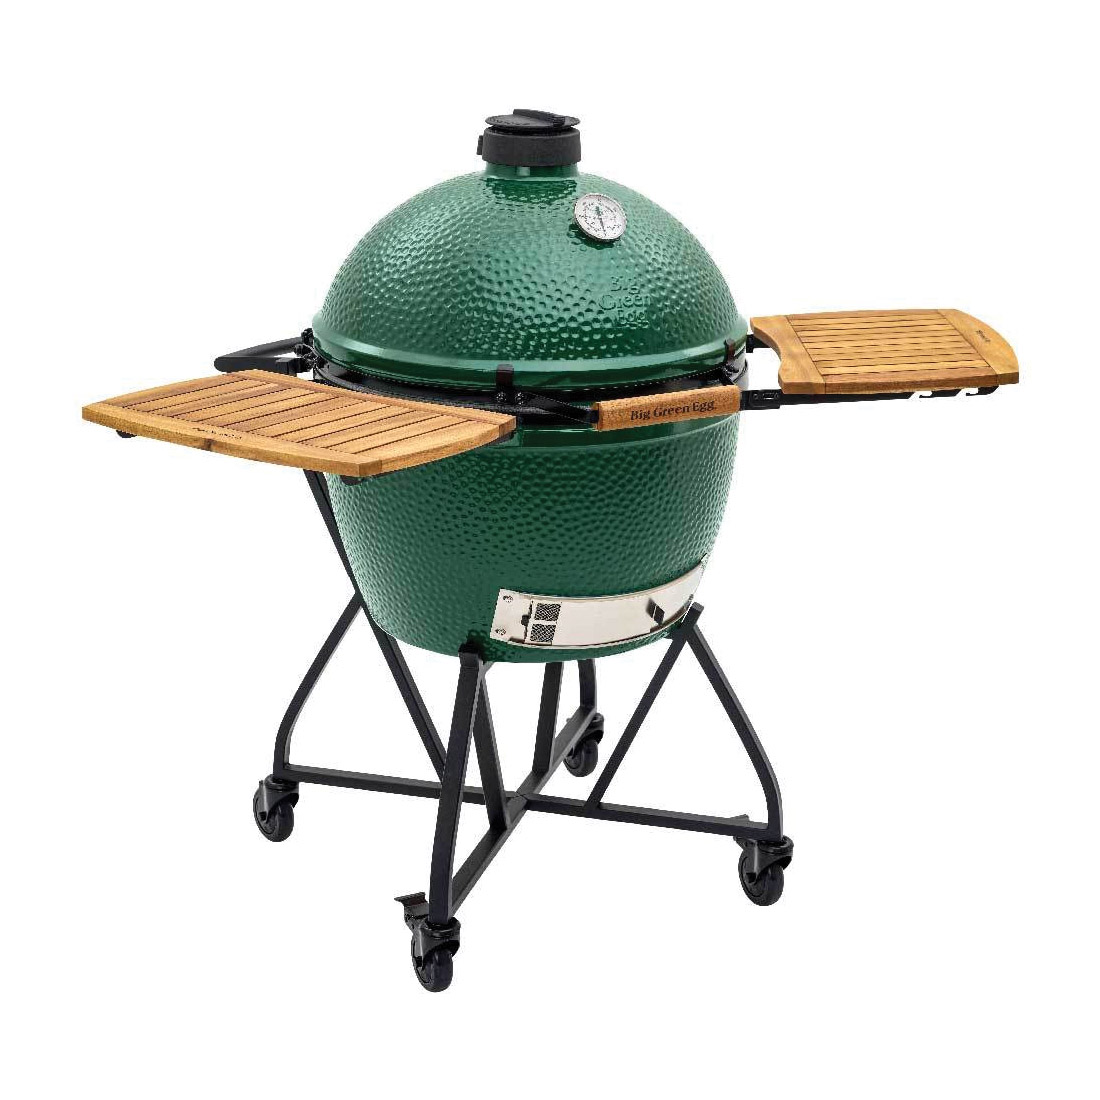 Big Green Egg 126467 Grill Cover, Fabric - 3